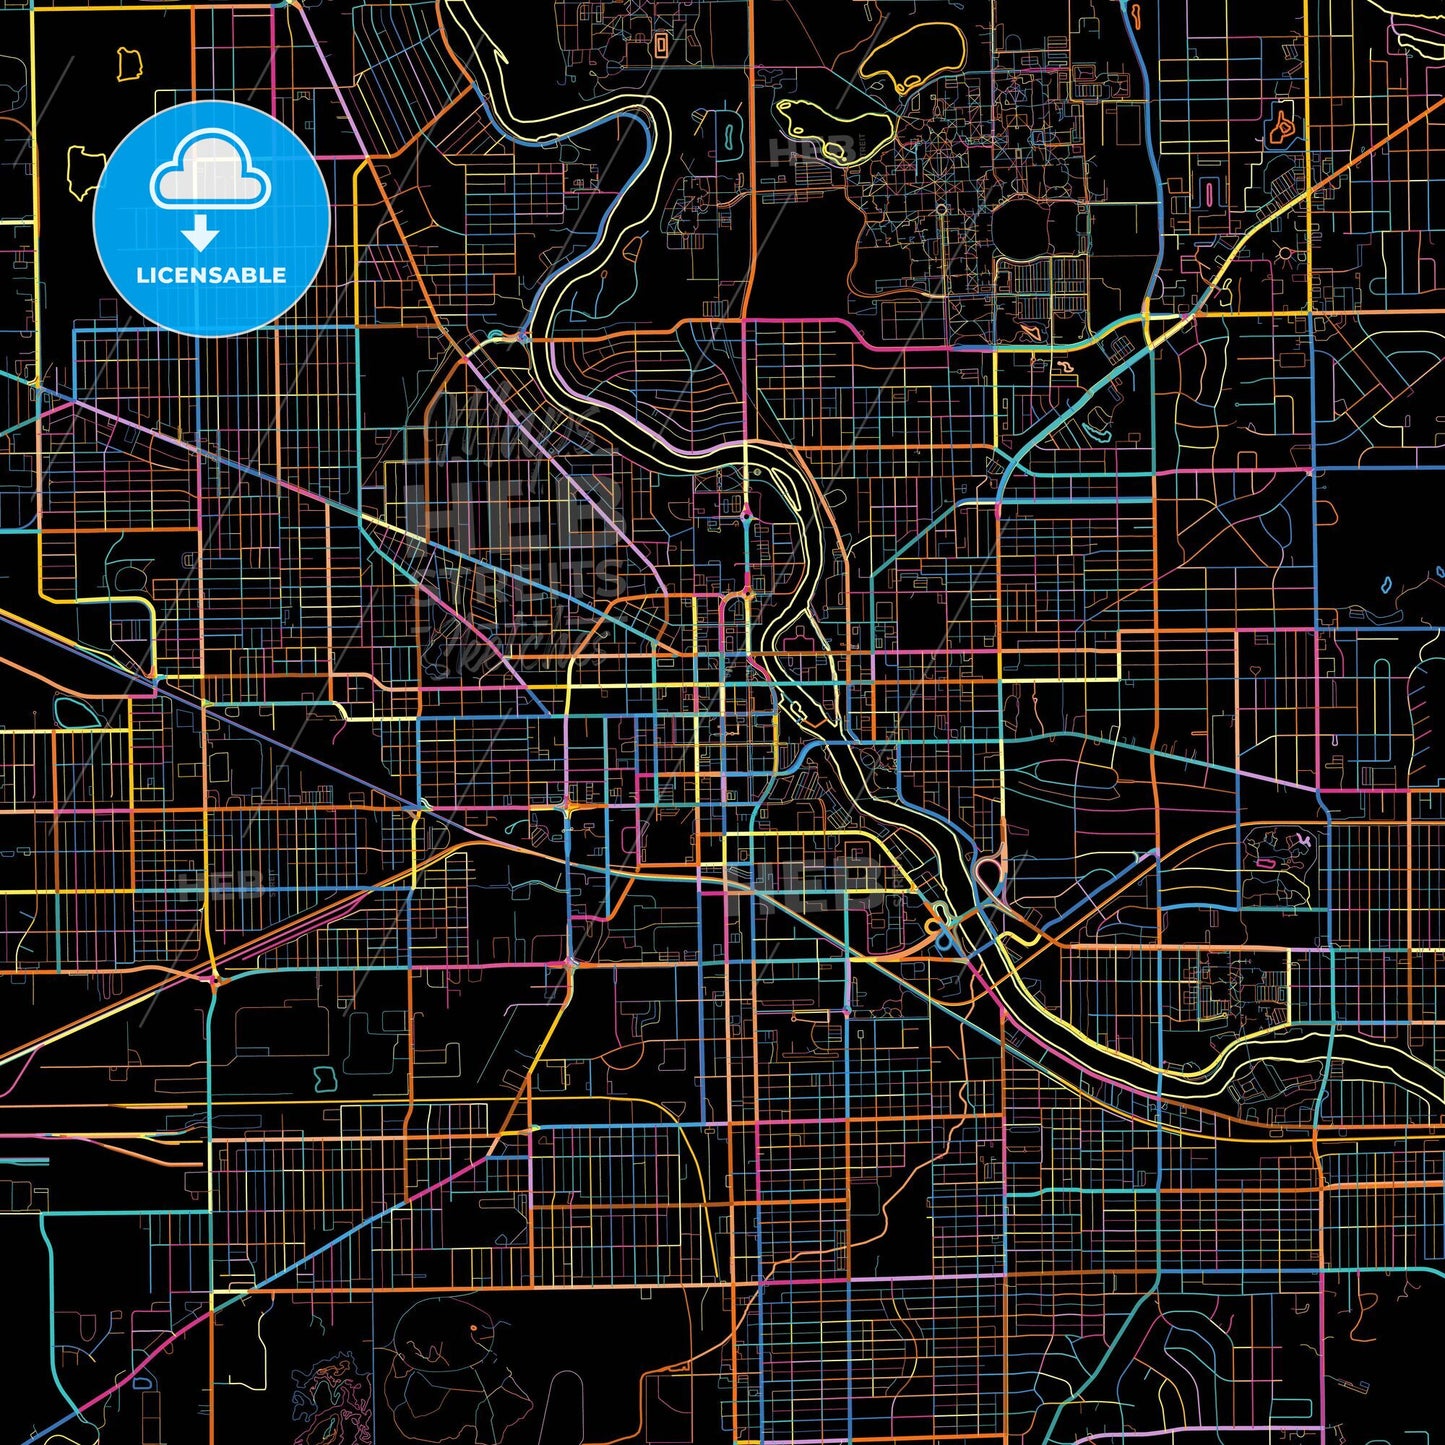 South Bend, Indiana, United States, colorful city map on black background